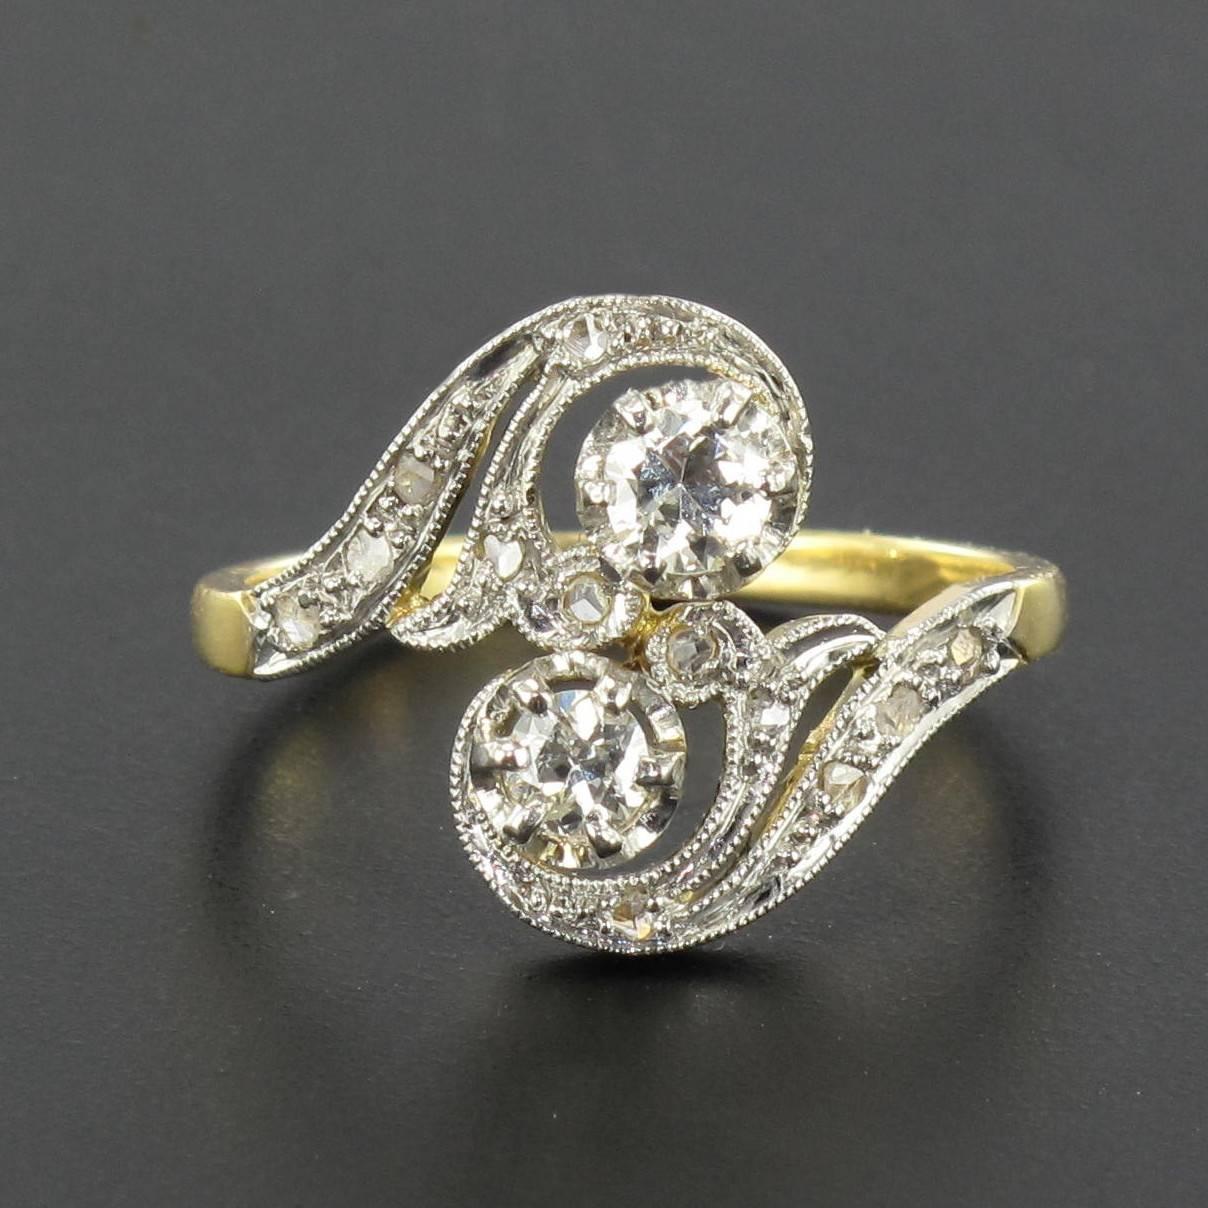 Ring in 18 carat yellow and white gold, eagle head hallmark. 

This stupendous antique ring is claw set with 2 brilliant cut diamonds on a chiselled letter ‘S’ form that is set with small rose cut diamonds. 

Total weight of the 2 main diamonds